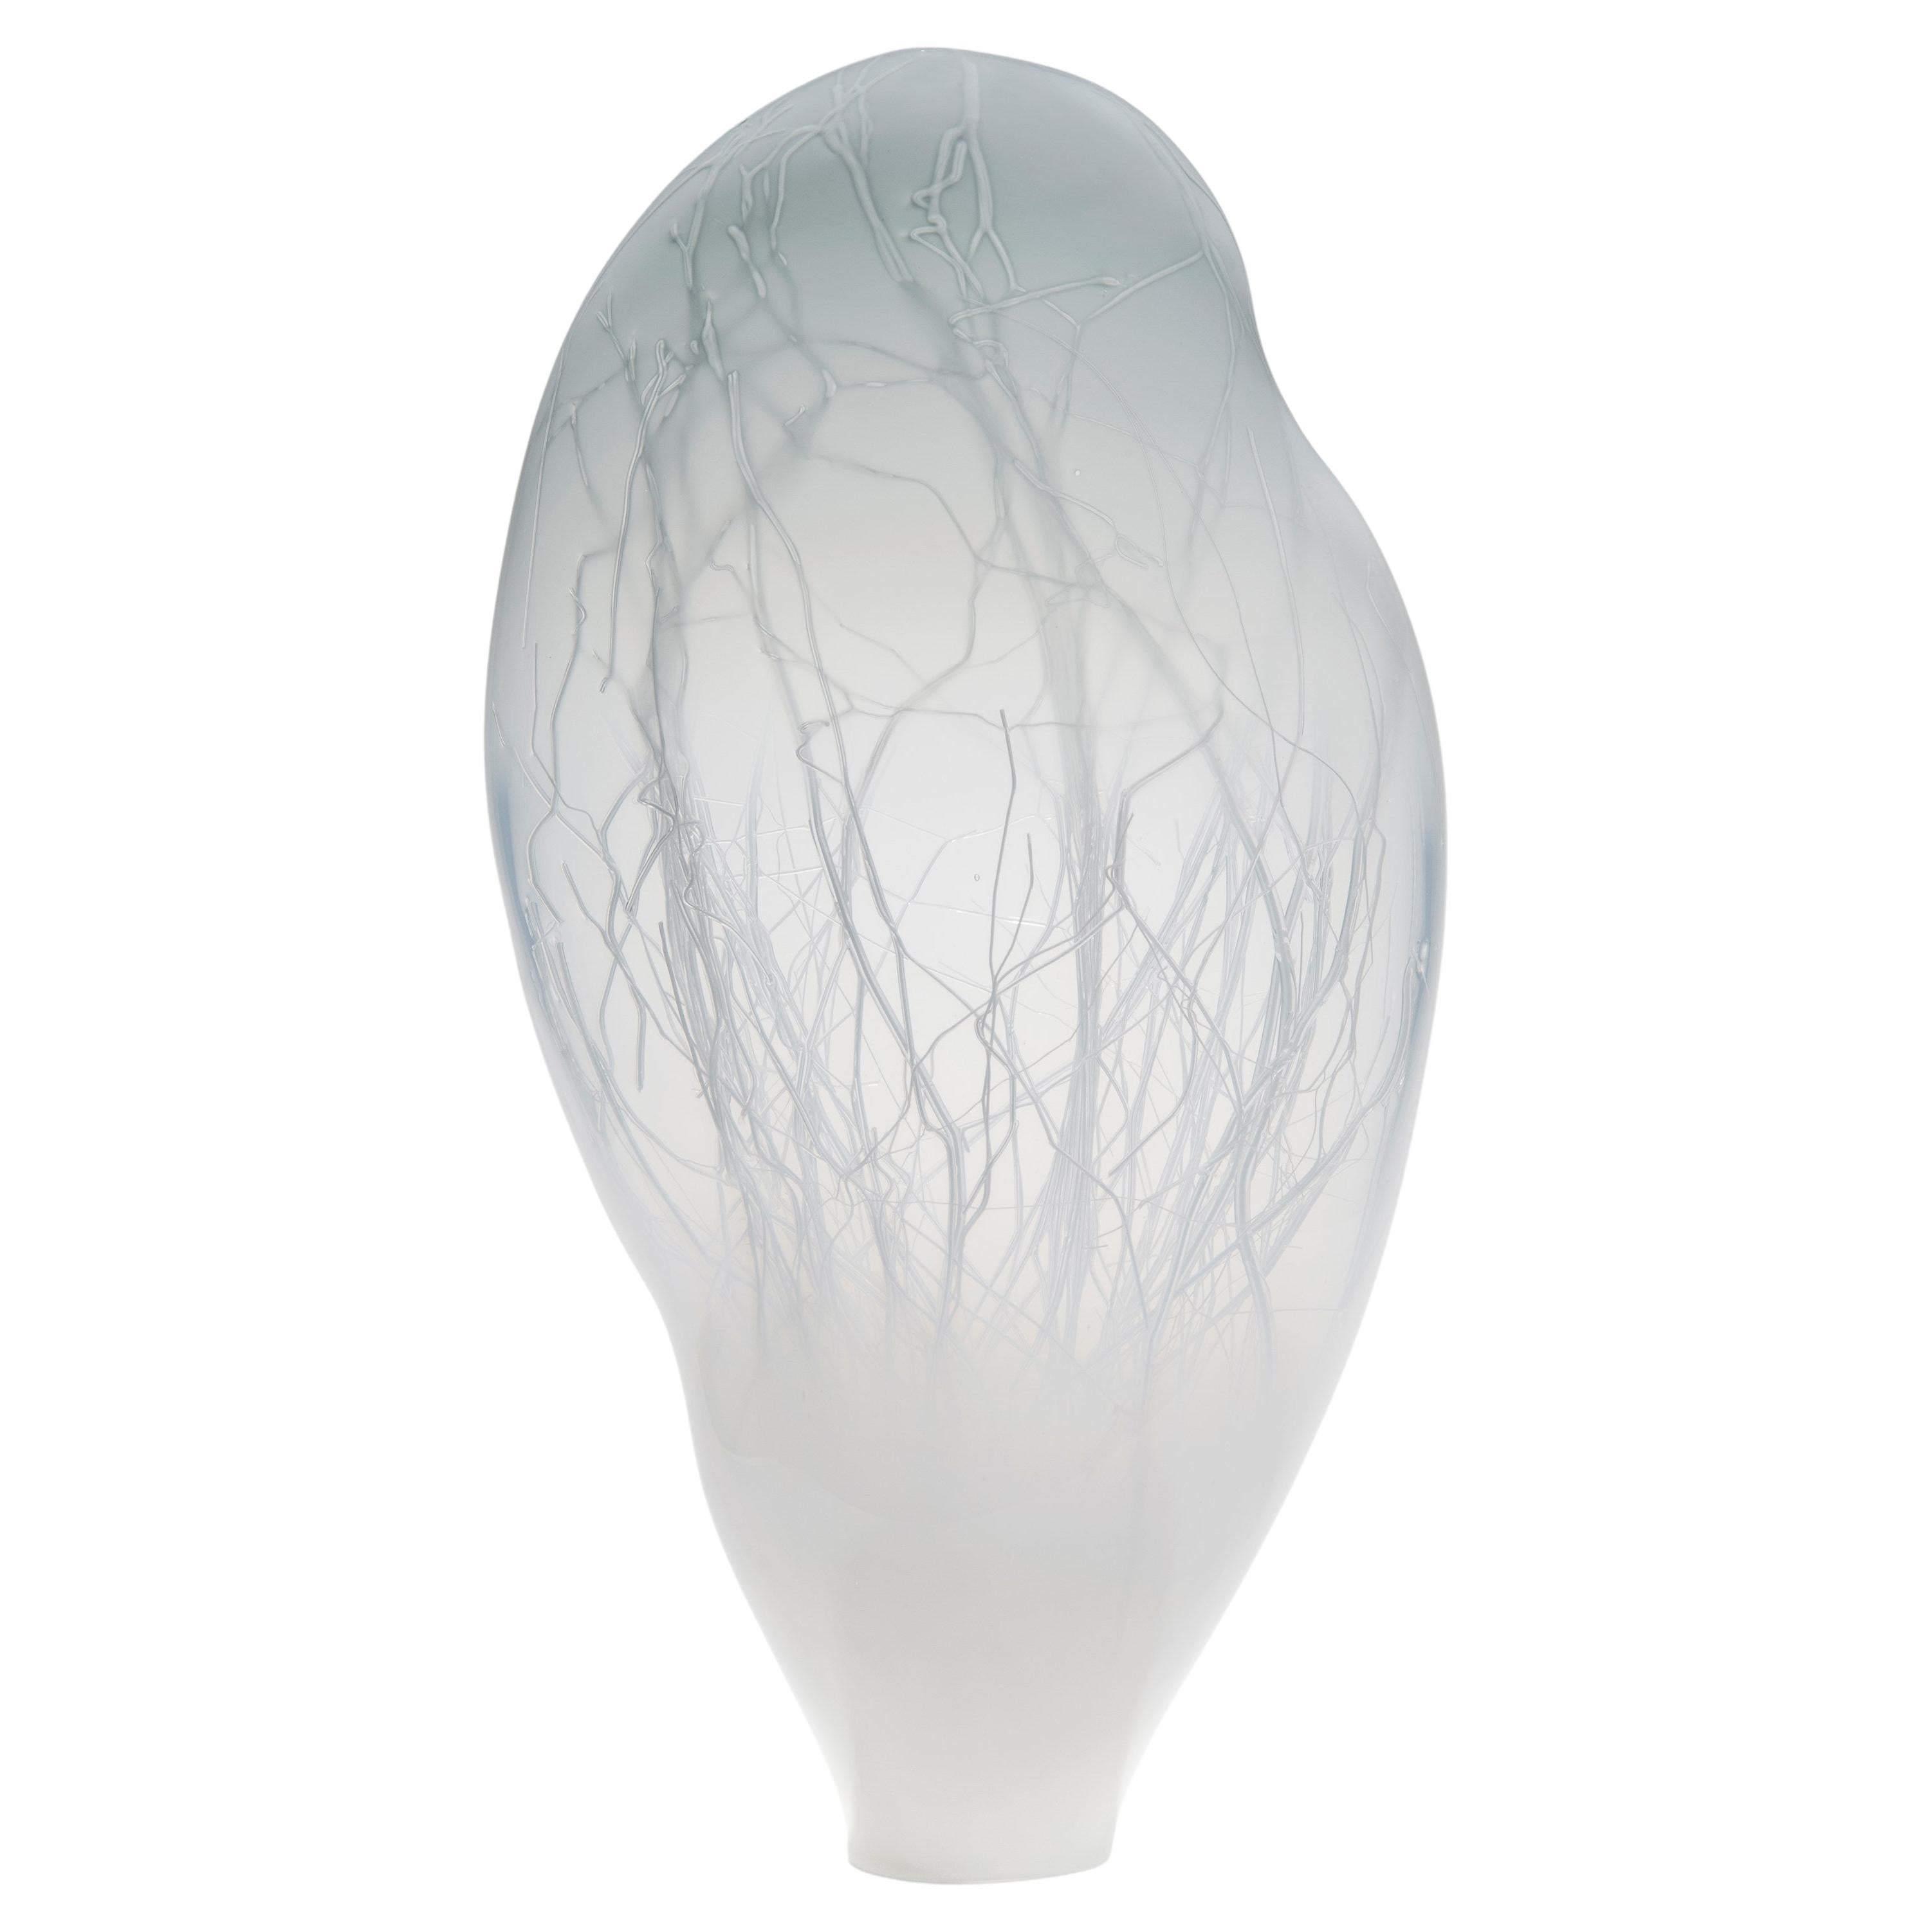 Penumbra in Grey, a White & Dove Grey Glass Sculpture by Enemark & Thompson